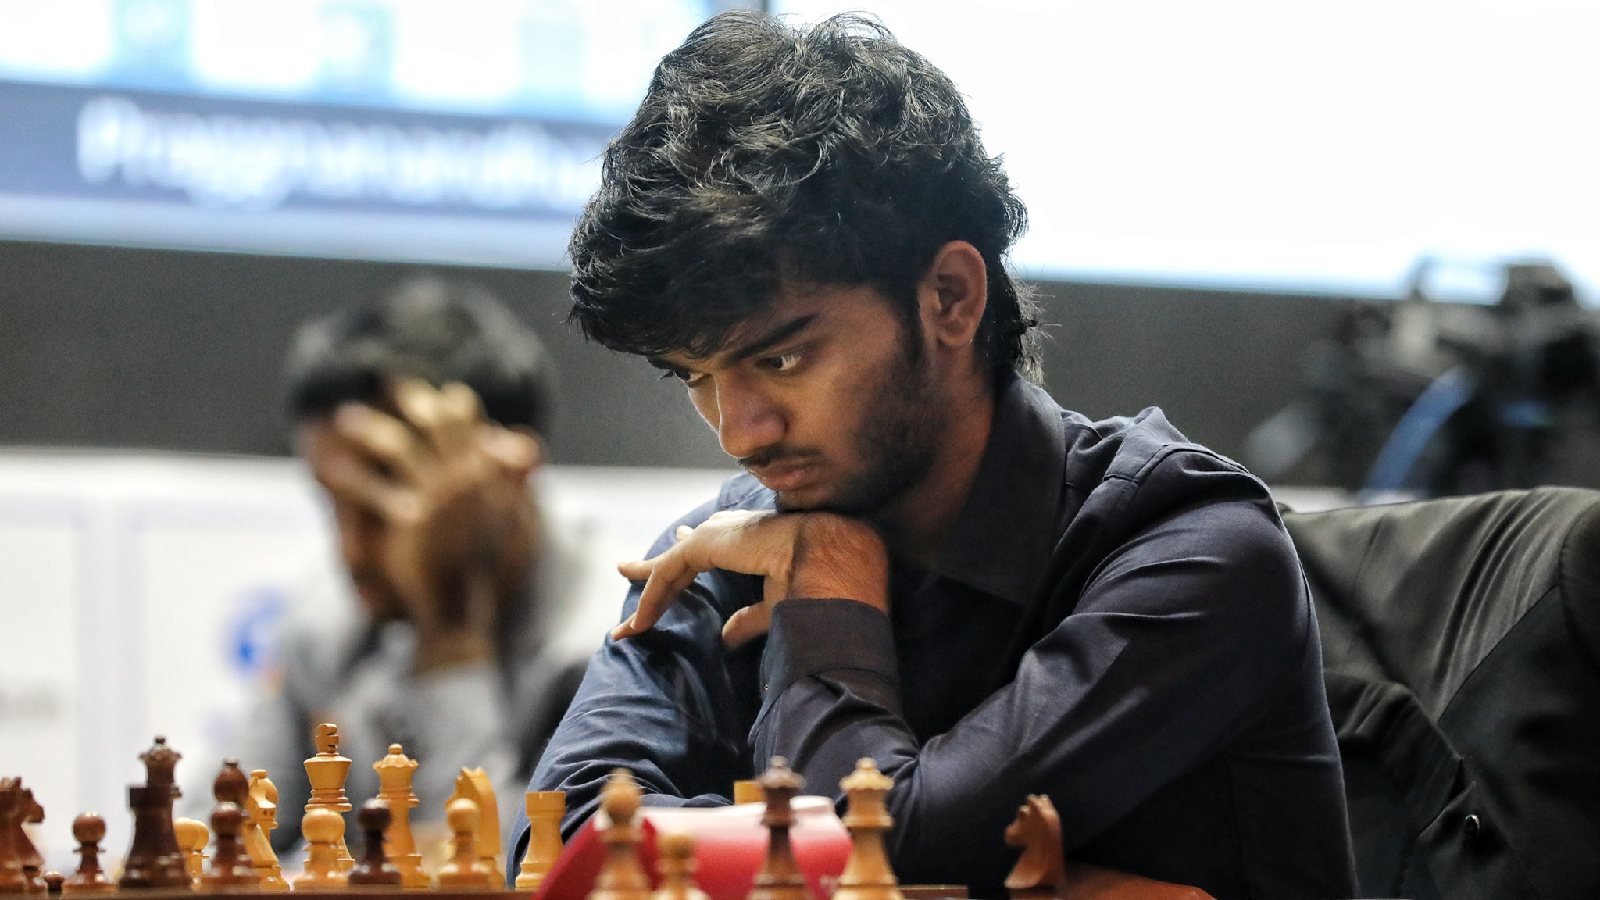 FIDE reveals Gukesh to face Ding Liren in World Chess Championship match in Singapore | Chess News